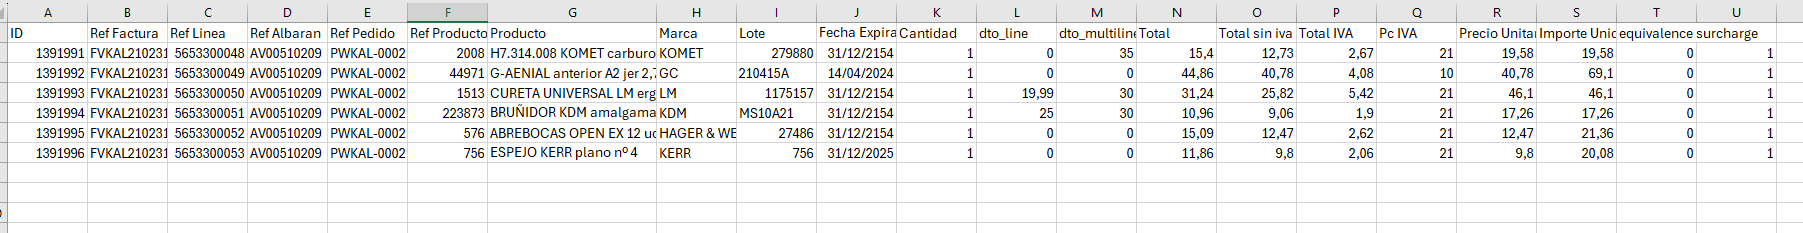 factura_excel_4.png